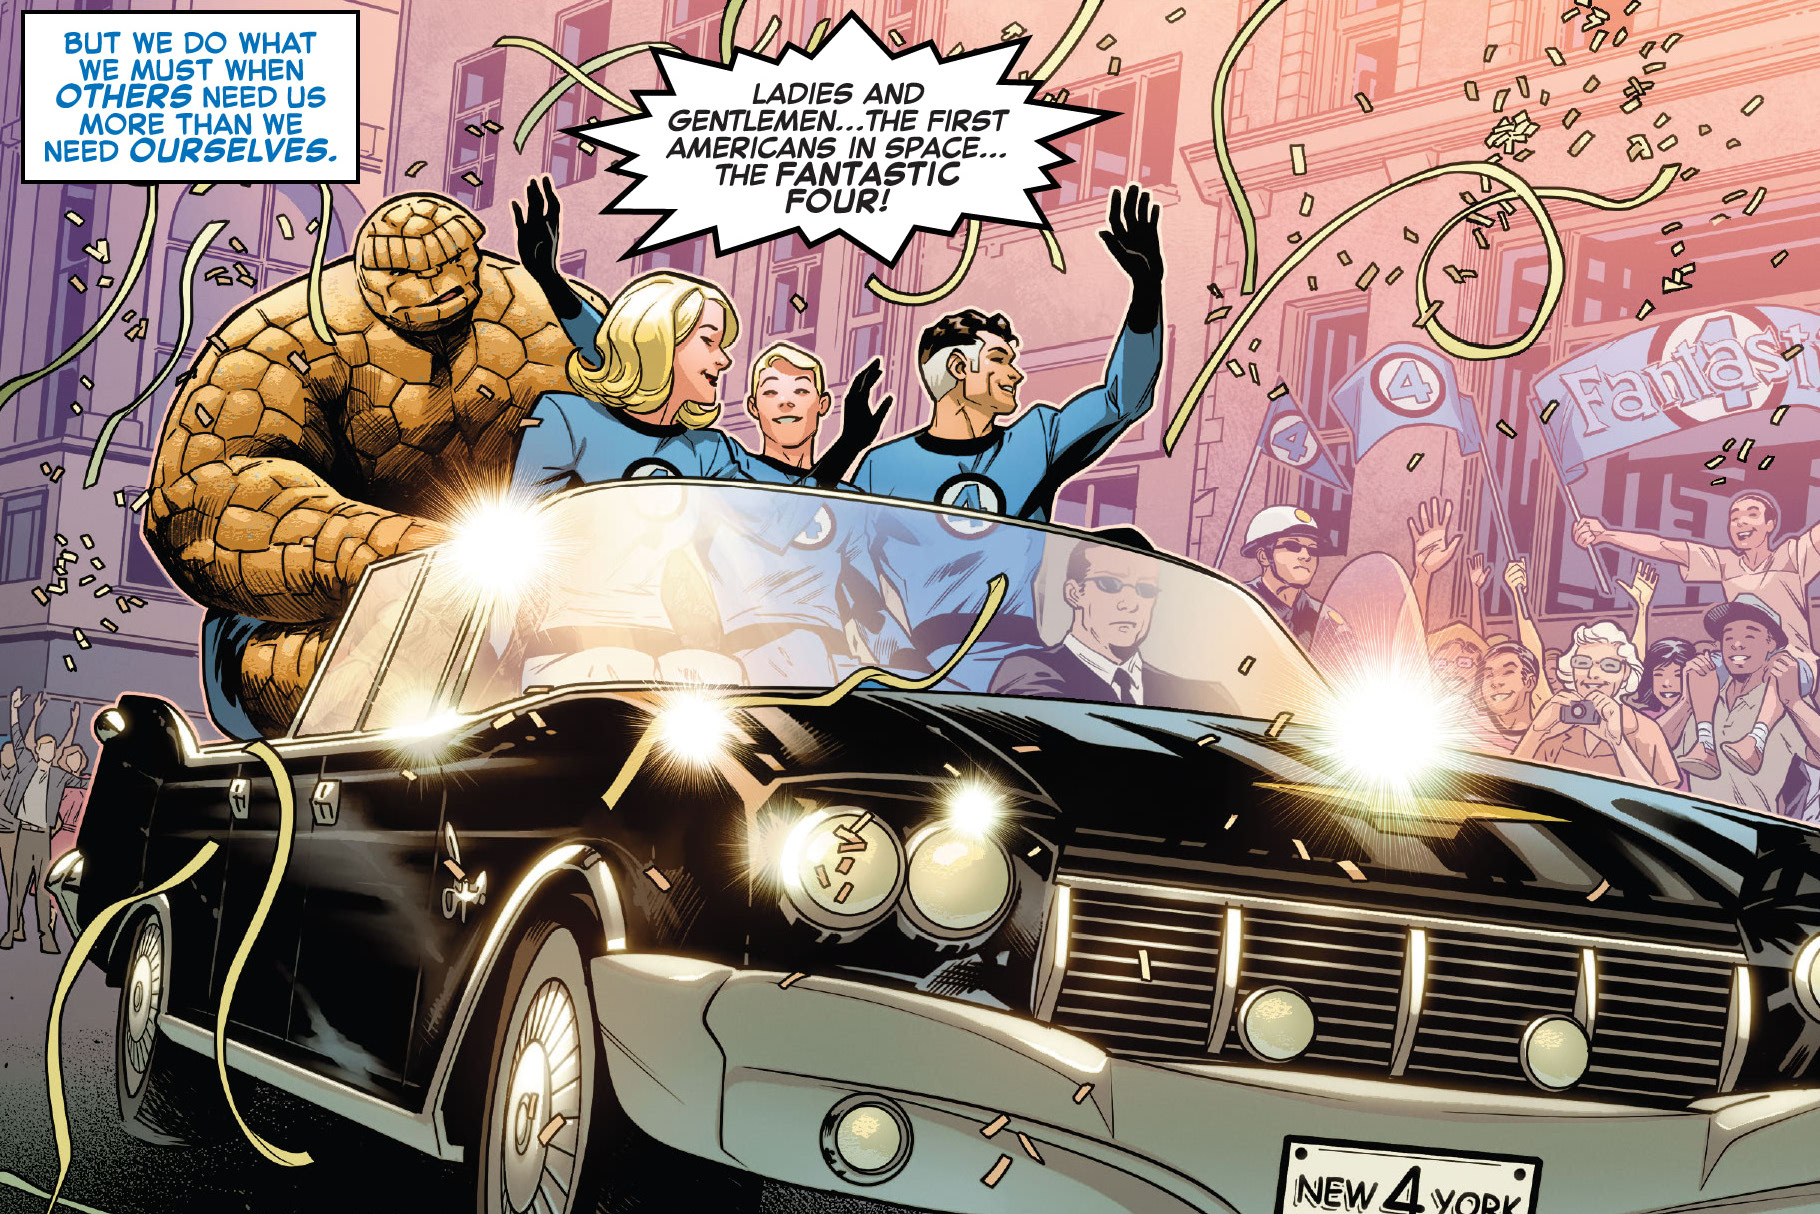 The Fantastic Four ride in a black convertible through a ticker tape parade, as an announcer hails them as the first Americans in space in Fantastic Four: Life Story #1.